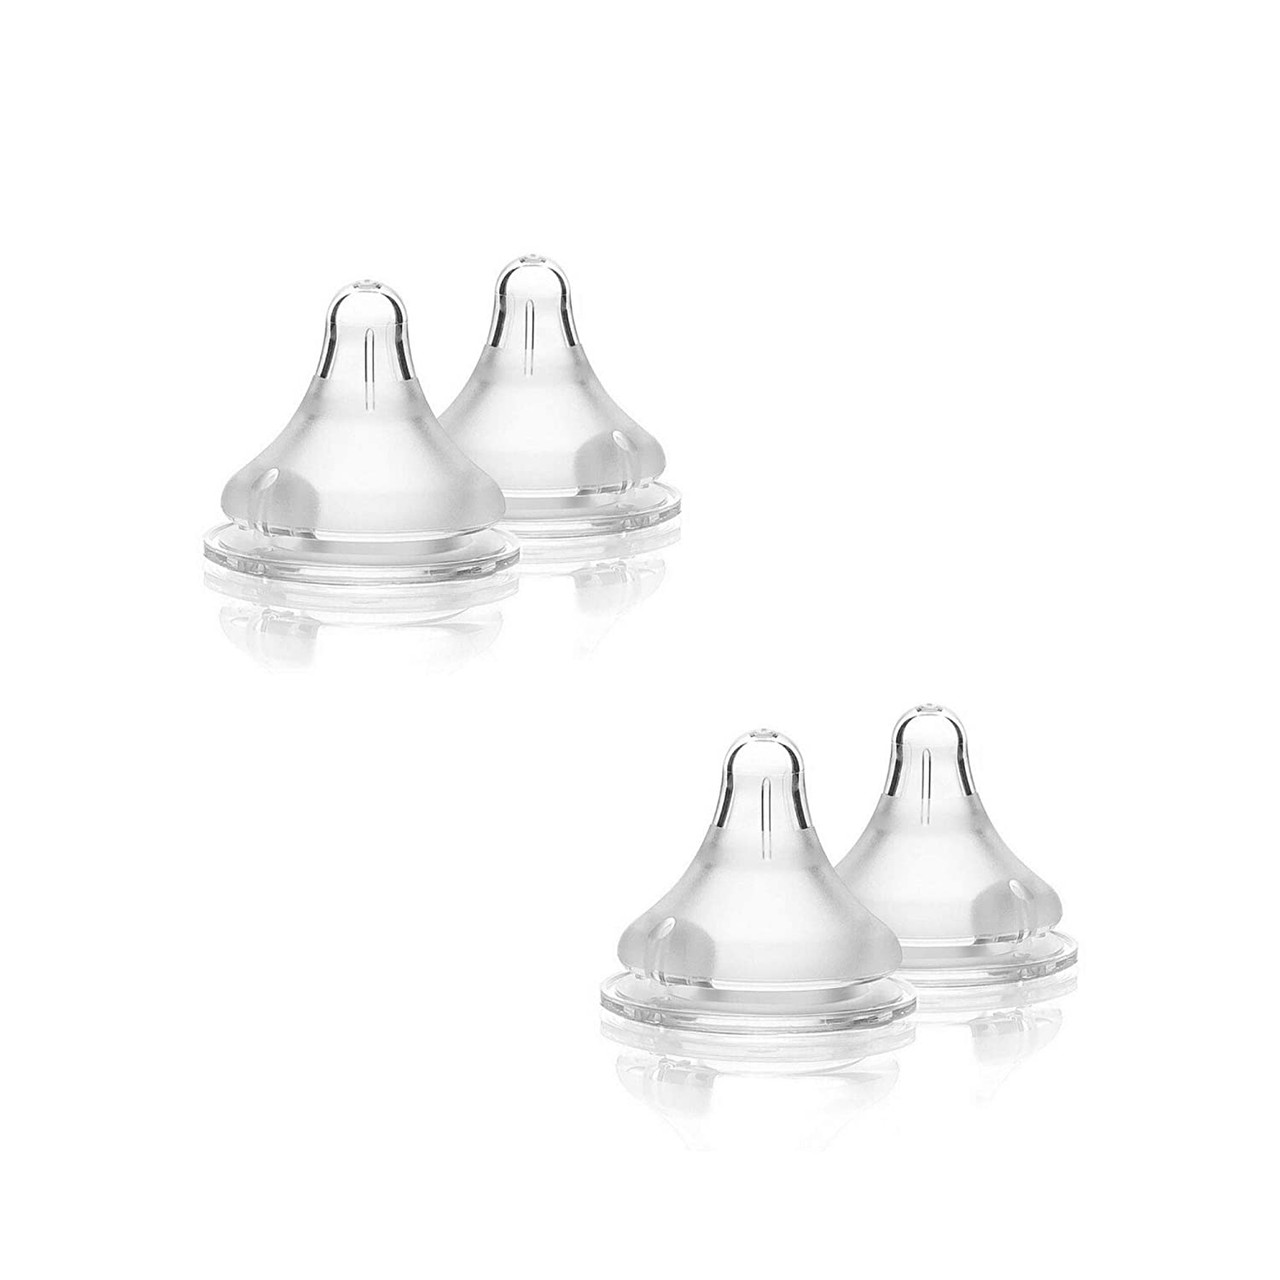 Lansinoh mOmma Natural Wave Slow-Flow Nipples, 2 Count - 2 Pack